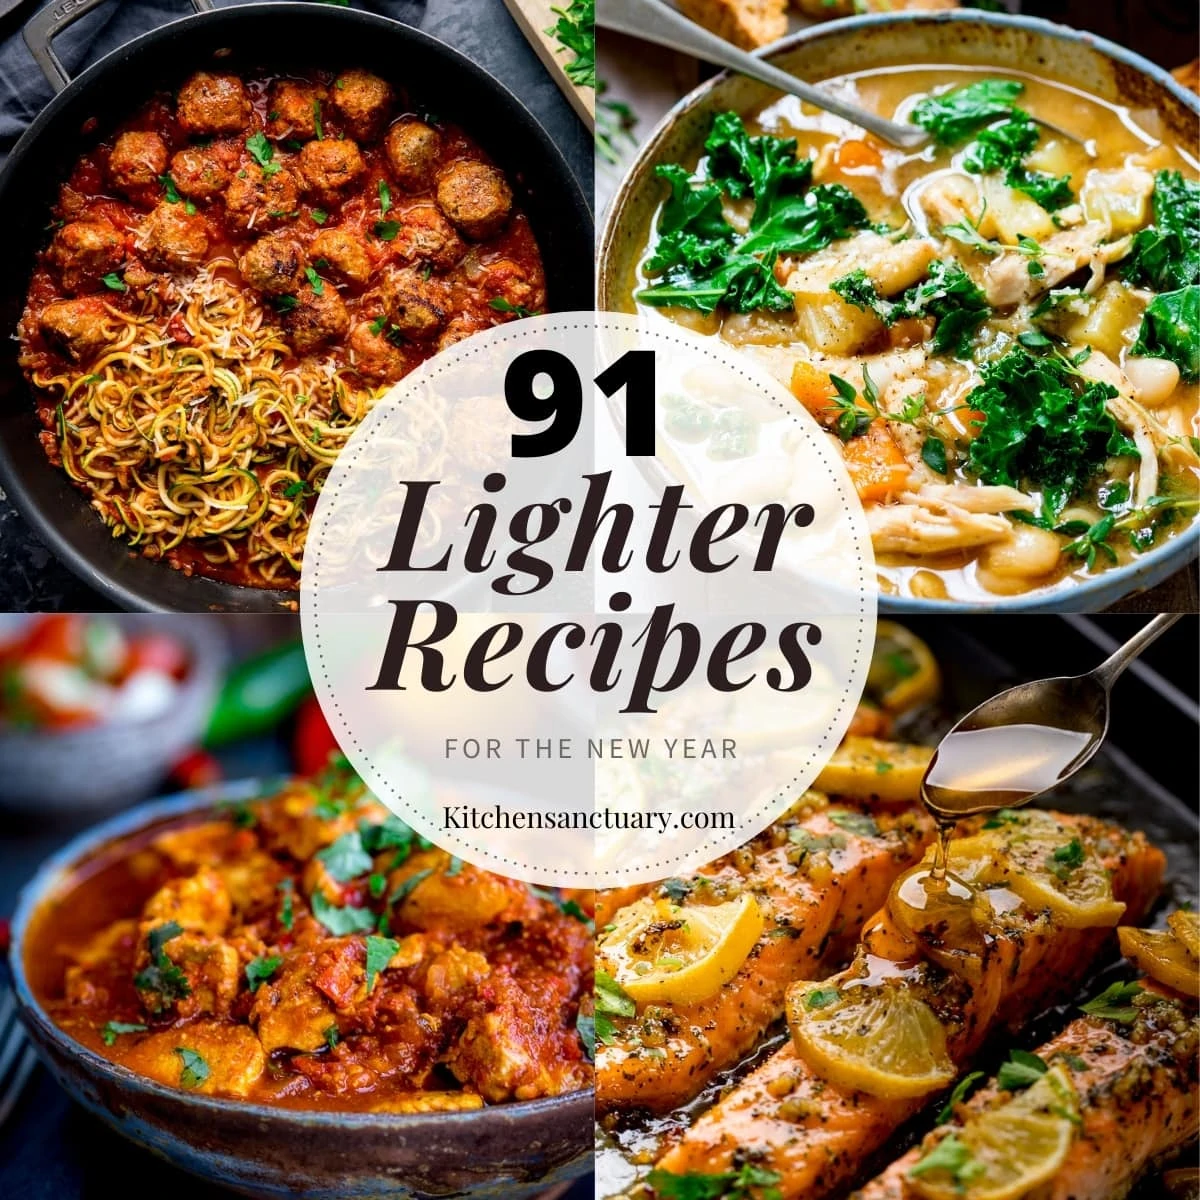 4 image collage of turkey meatballs, chicken soup, chicken curry and baked salmon. A overlay on top saying 91 lighter recipes for the new year.